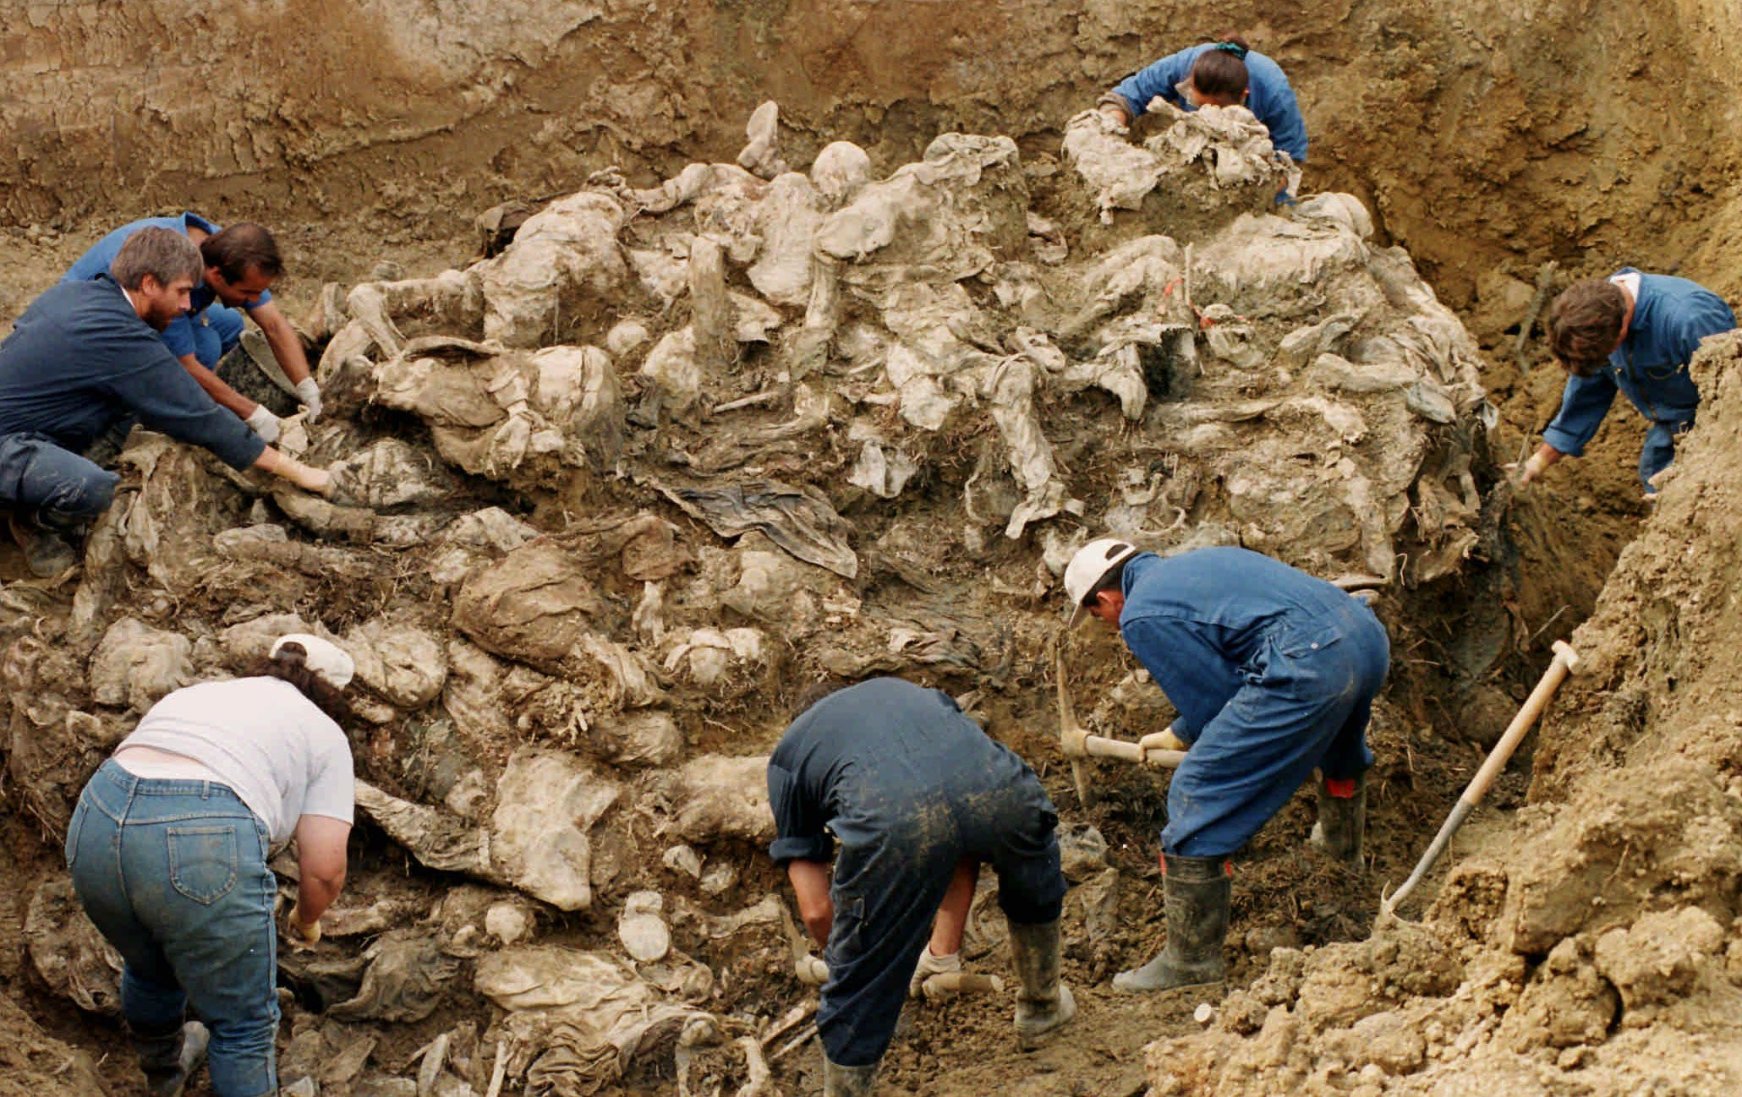 During the first three months of war, from April to June 1992, the Bosnian Serb forces, with support from the JNA, destroyed 296 predominantly Bosniak villages in the region around Srebrenica, forcibly uprooted some 70,000 Bosniaks from their homes and systematically massacred at least 3,166 Bosniaks.